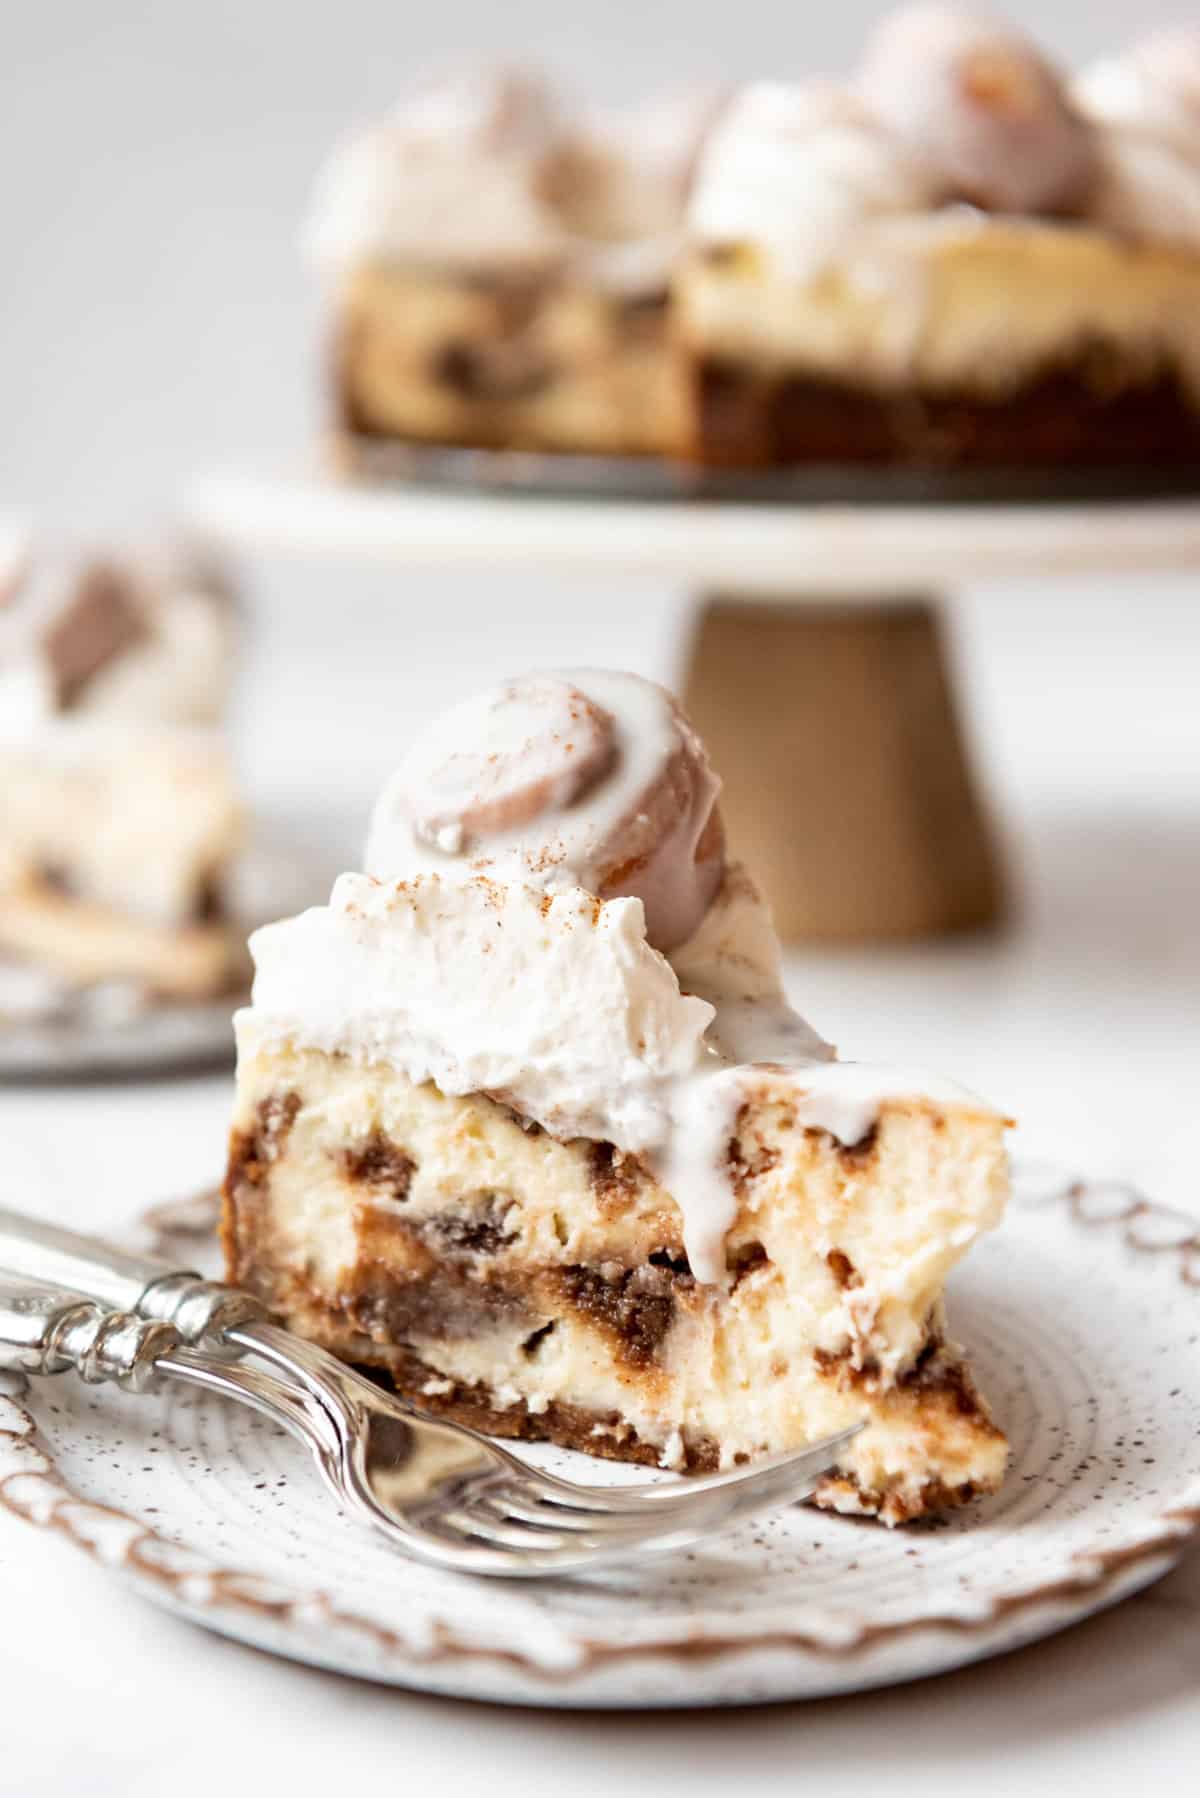 A slice of cinnamon swirl cheesecake in front of the rest of the cheesecake on a cake stand.